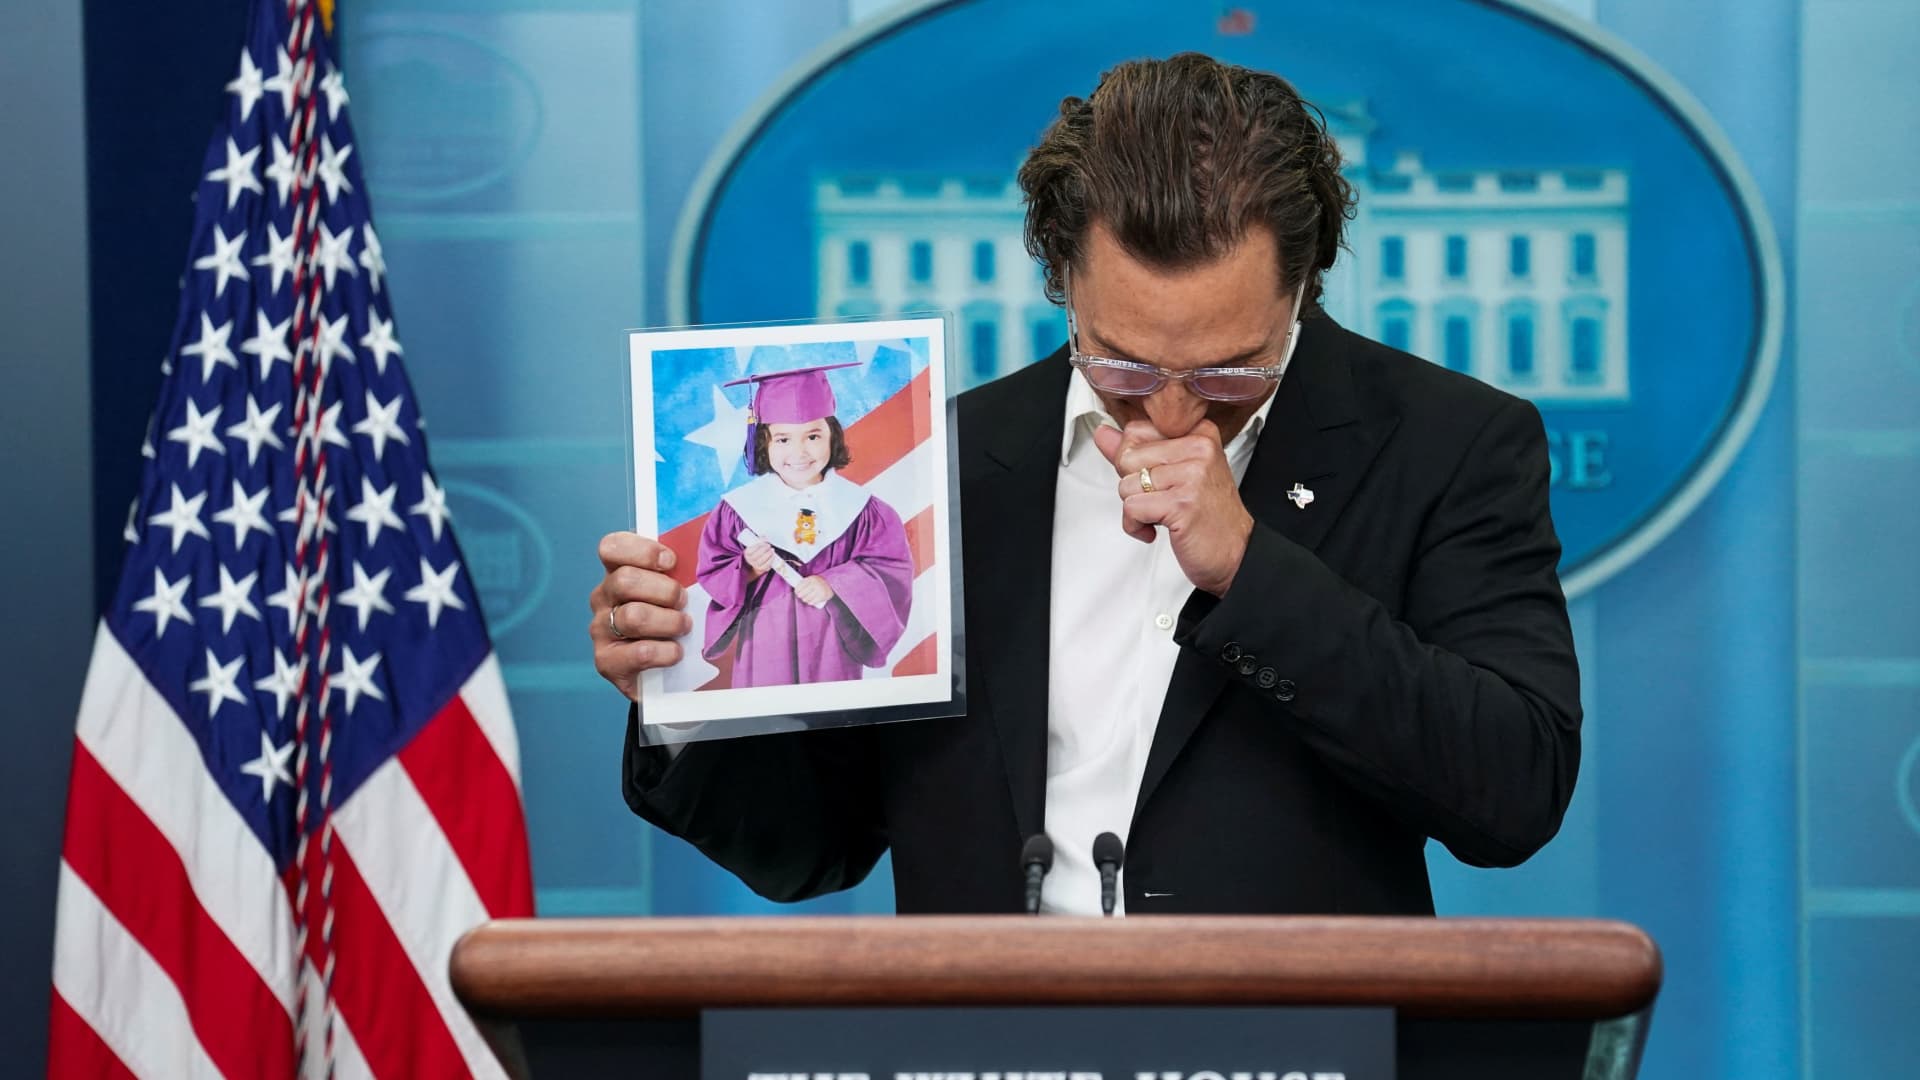 Actor Matthew McConaughey, a native of Uvalde, Texas as well as a father and a gun owner, becomes emotional as he holds up a picture of a young victim of the school shooting in Uvalde as he speaks to reporters about mass shootings in the United States during a press briefing at the White House in Washington, U.S., June 7, 2022. 